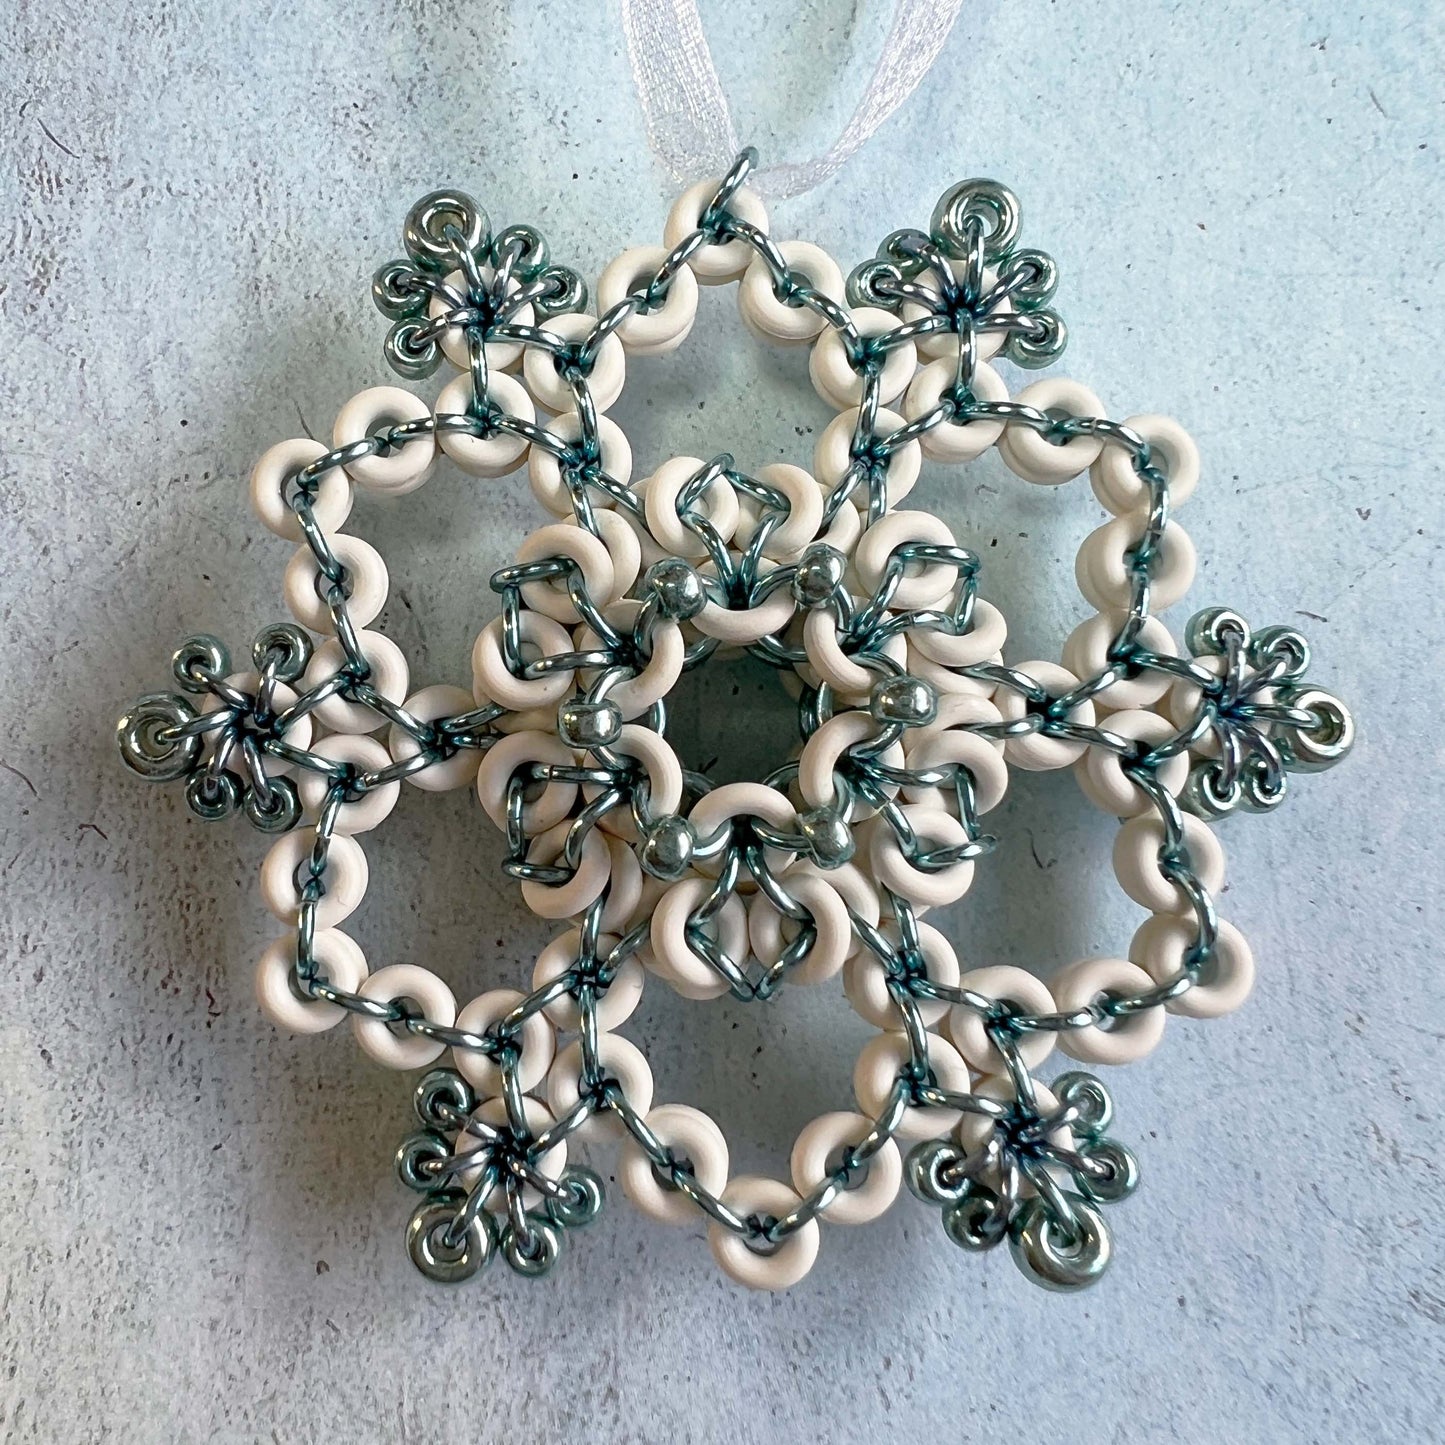 Beaded Lentil Snowflake Ornament White Sky Blue Sea Foam Refill - materials only (no instructions included)